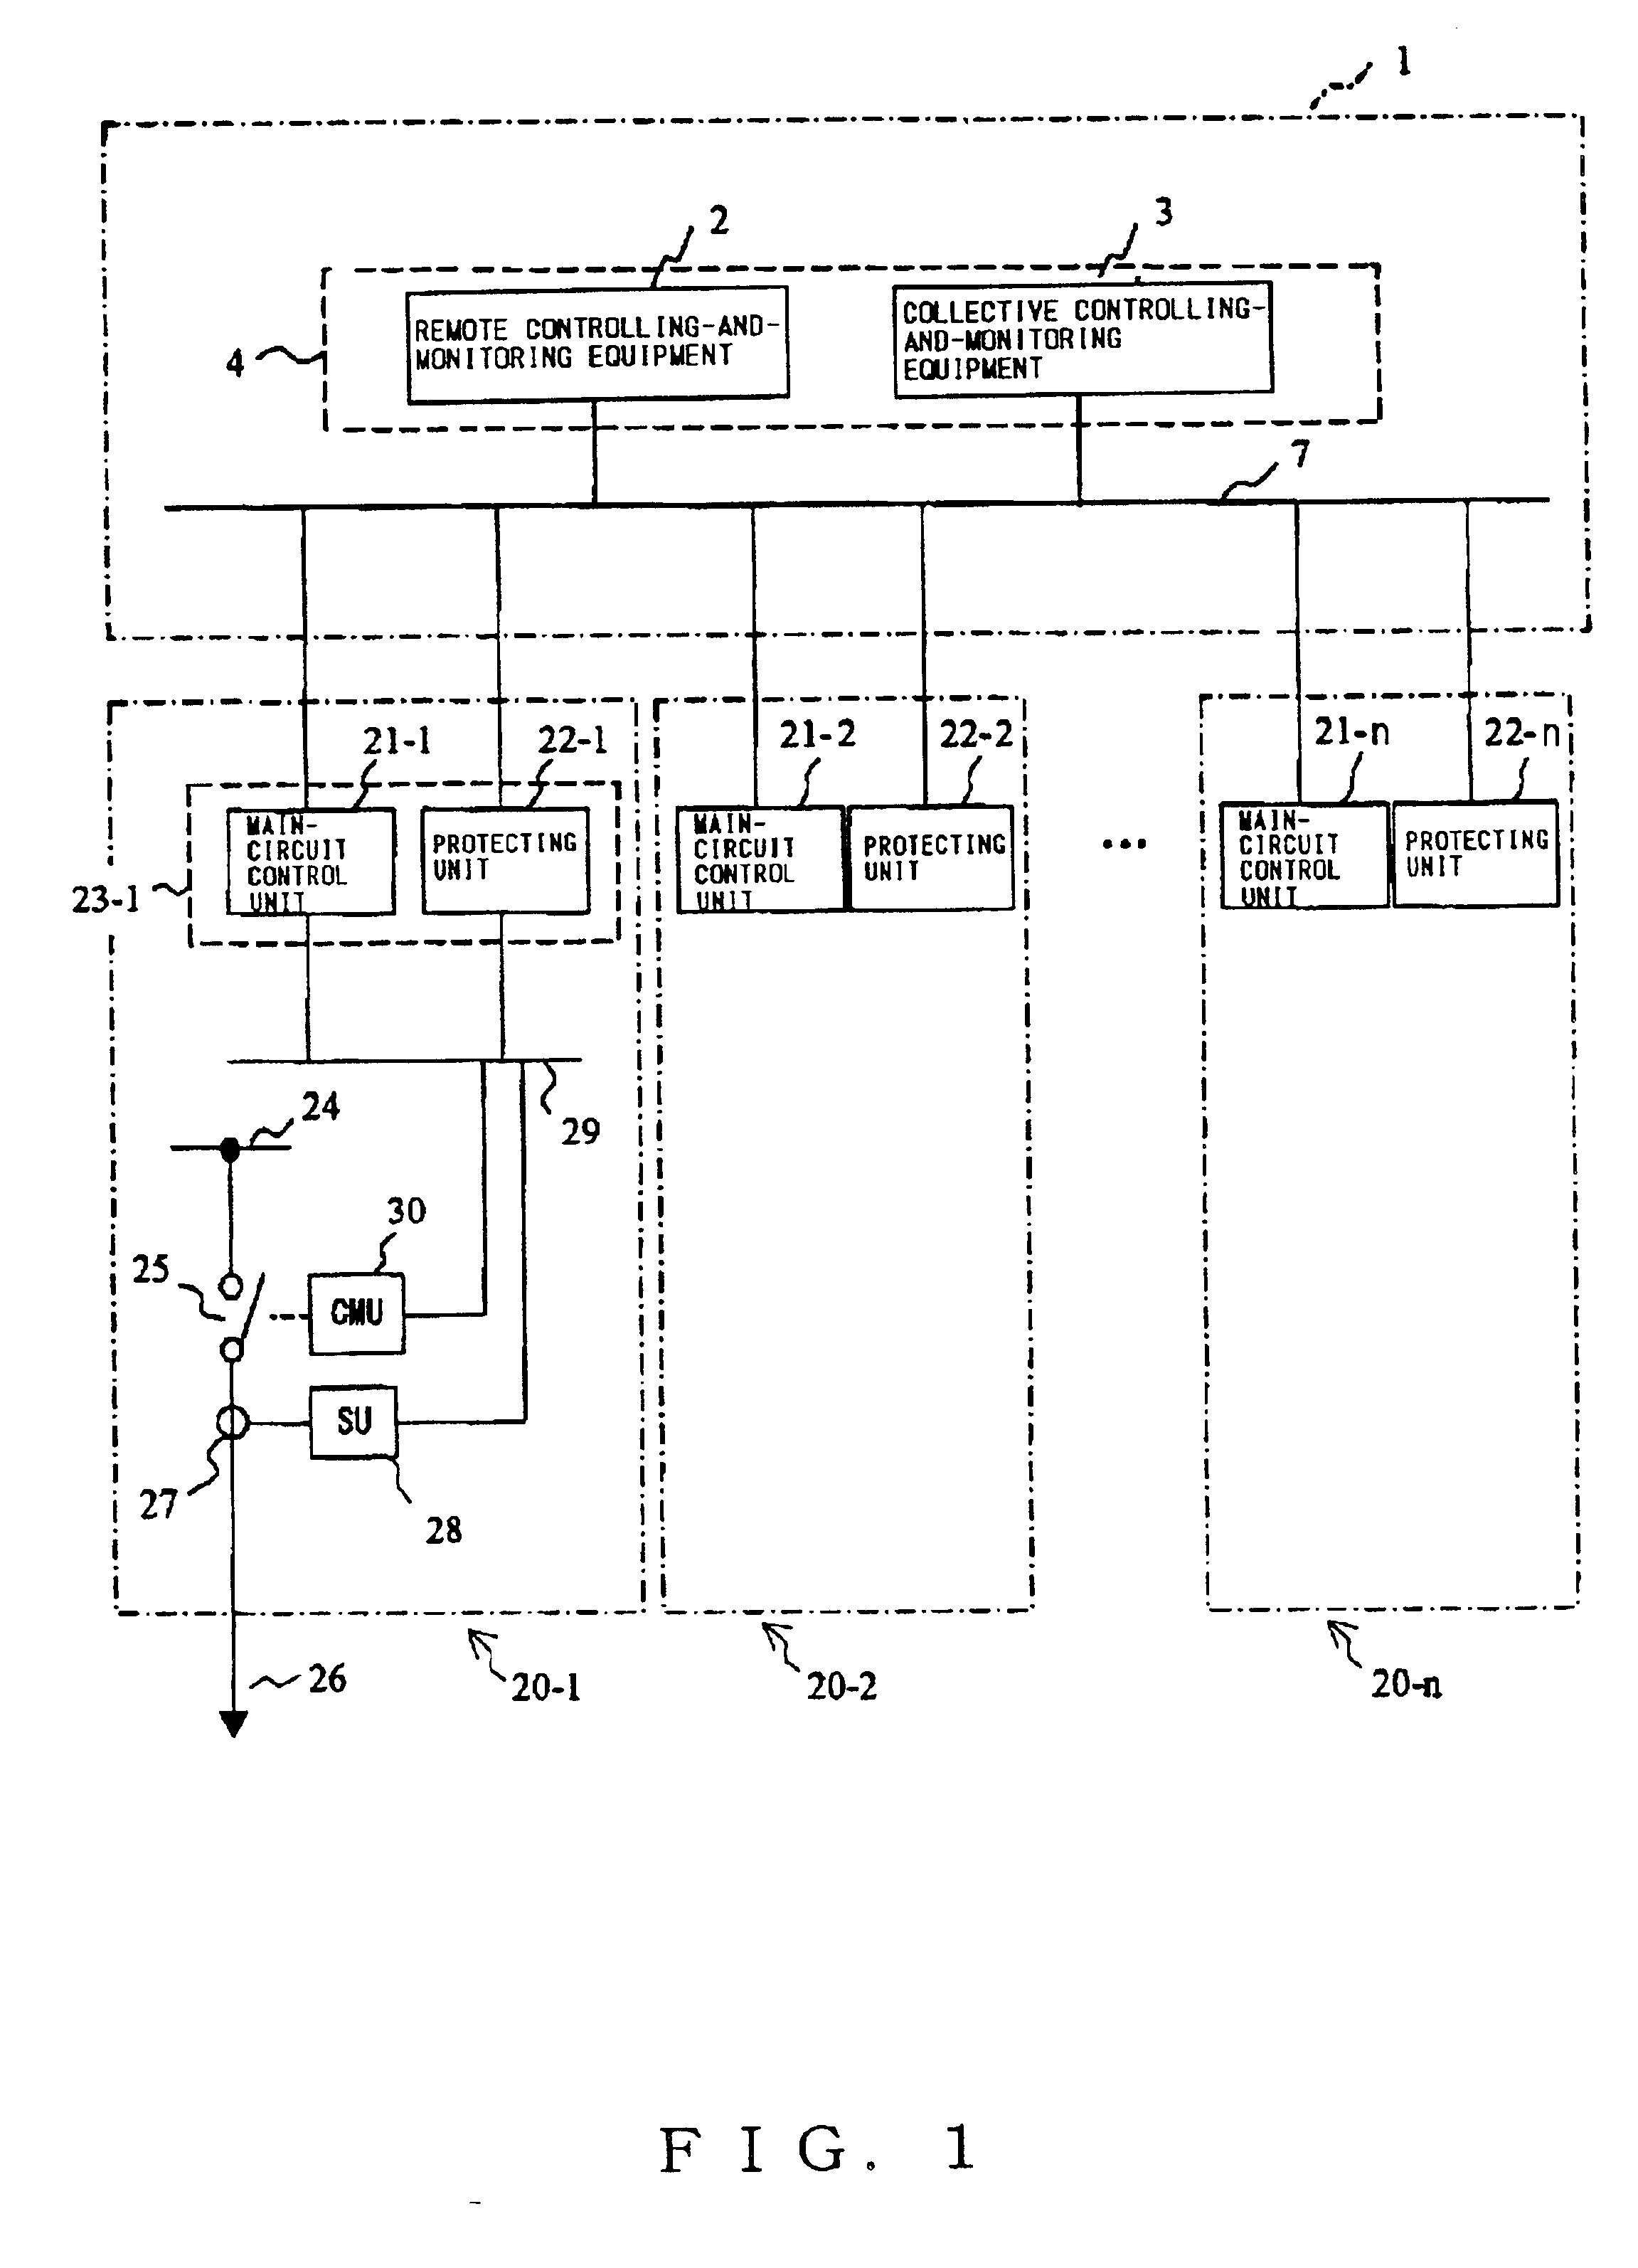 System for protecting and controlling substation main circuit components